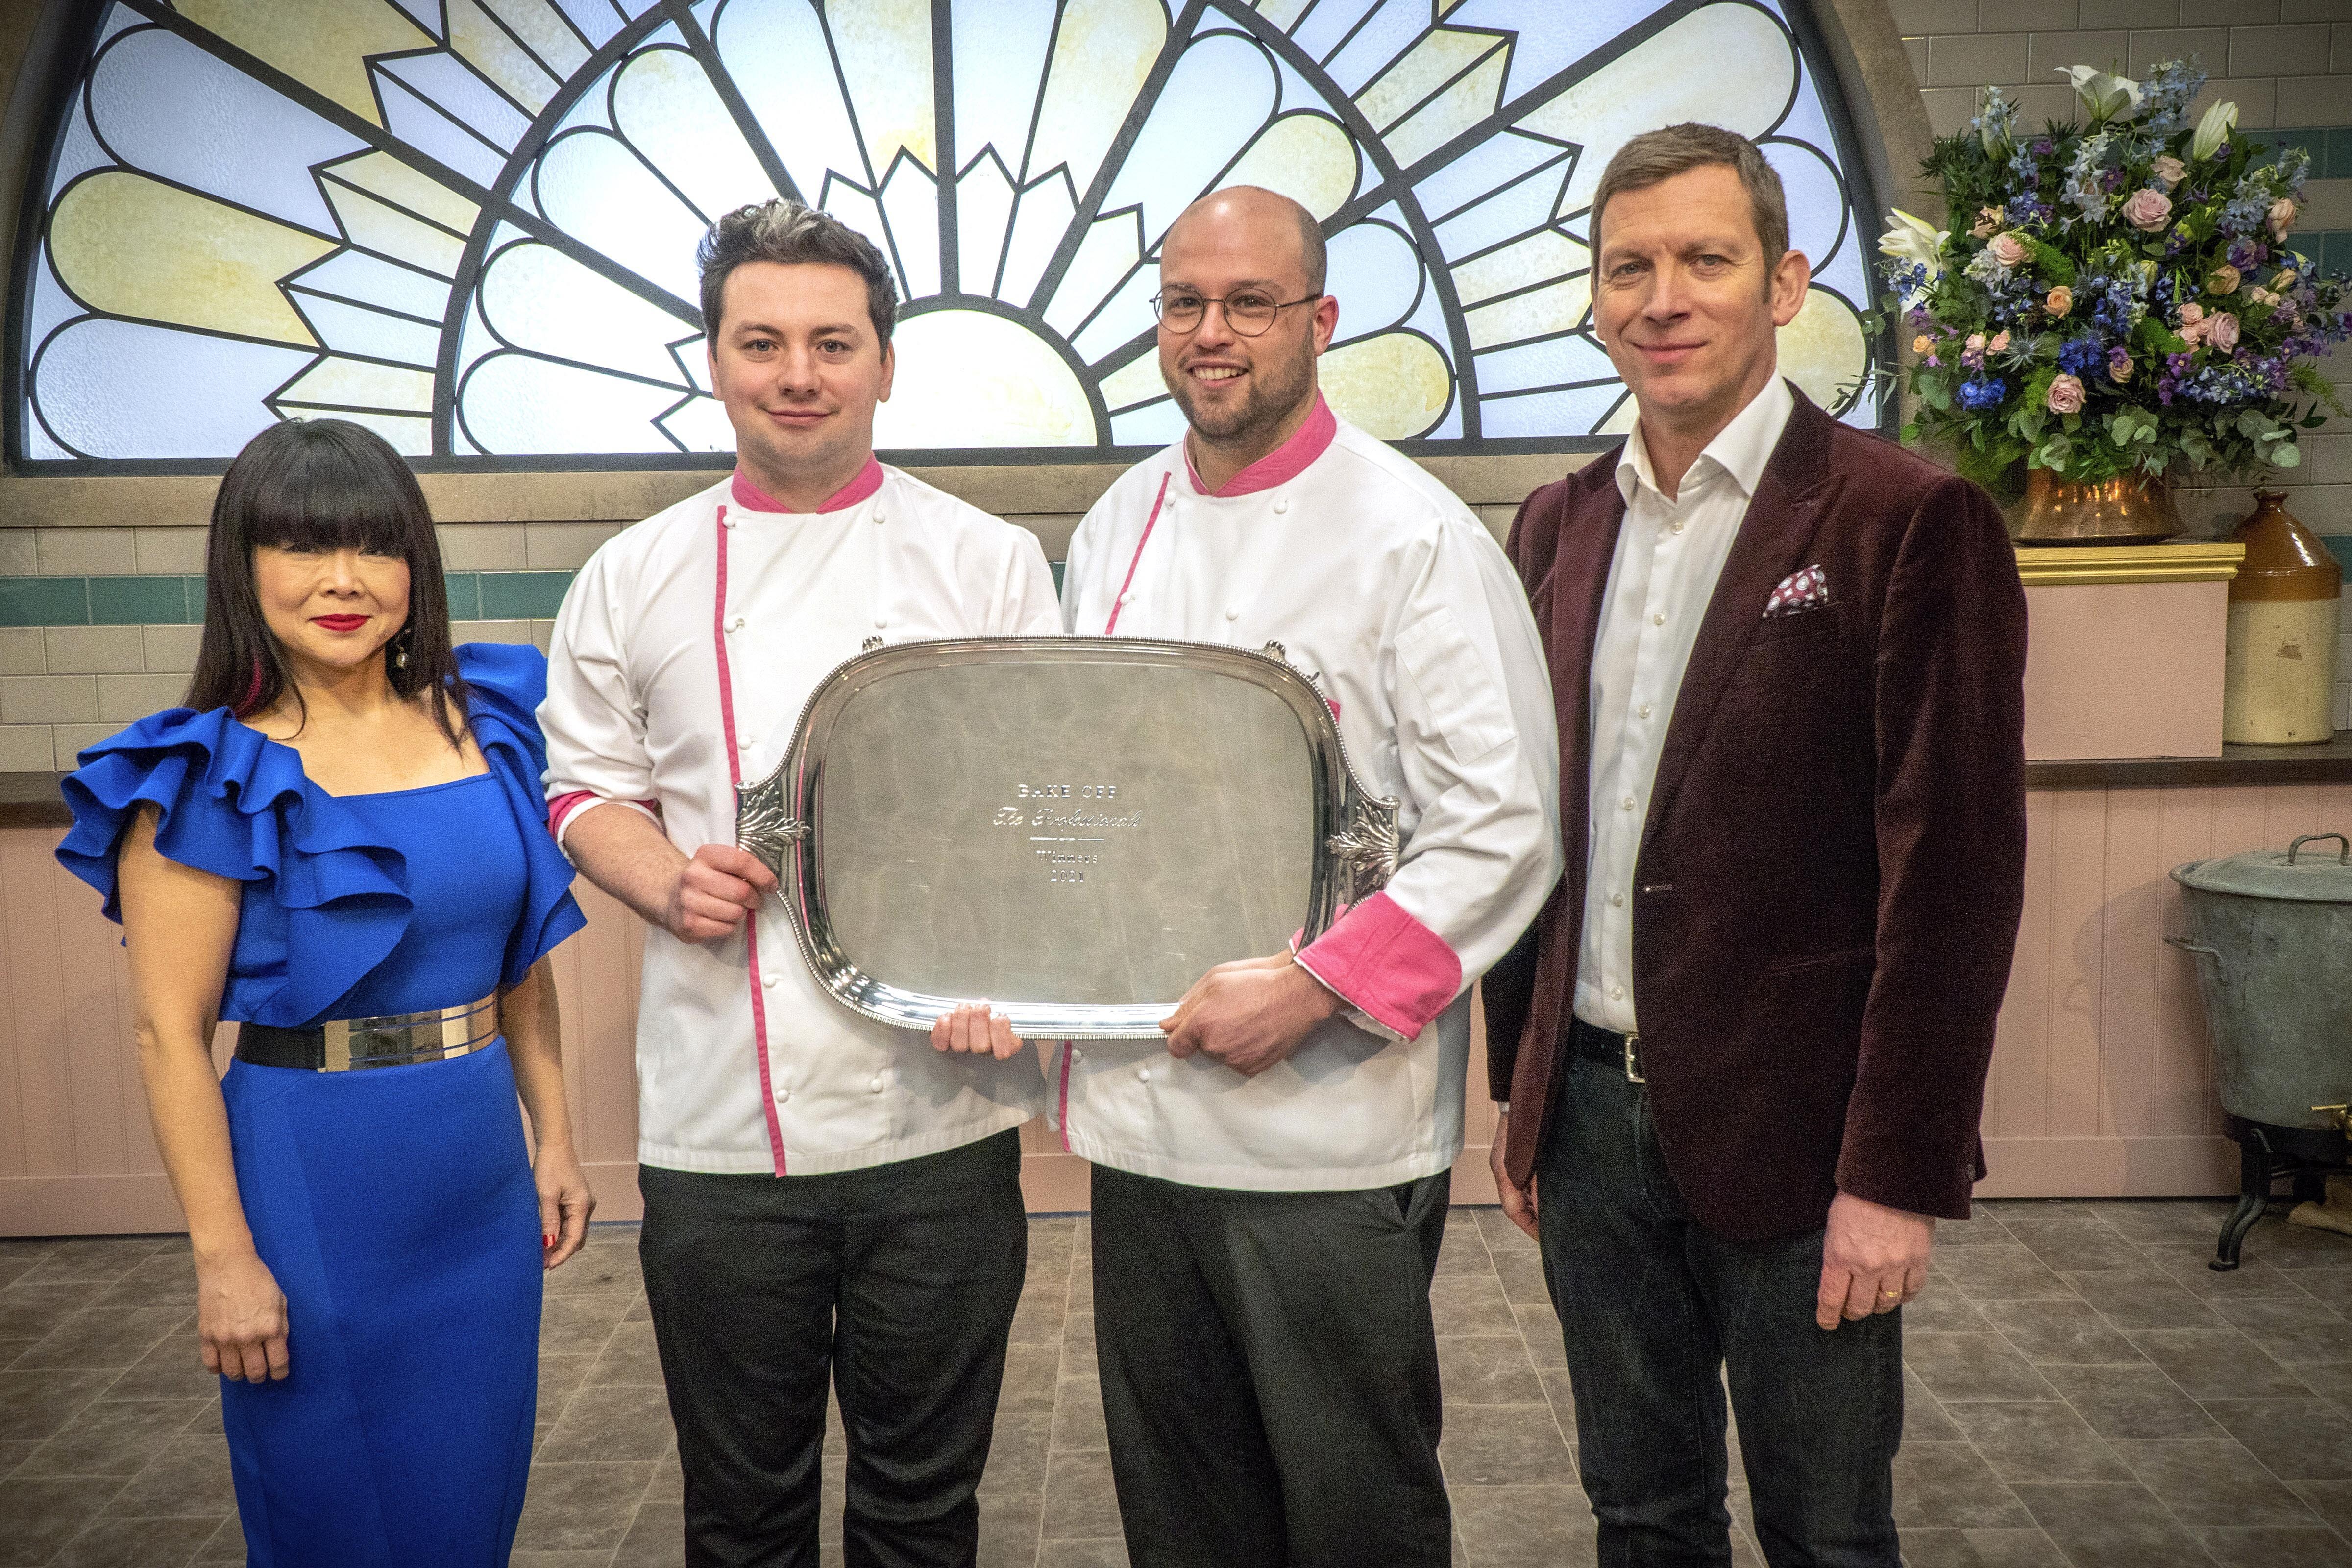 Pastry chefs from Cardiff's Gin & Bake win Bake Off: The Professionals 2021